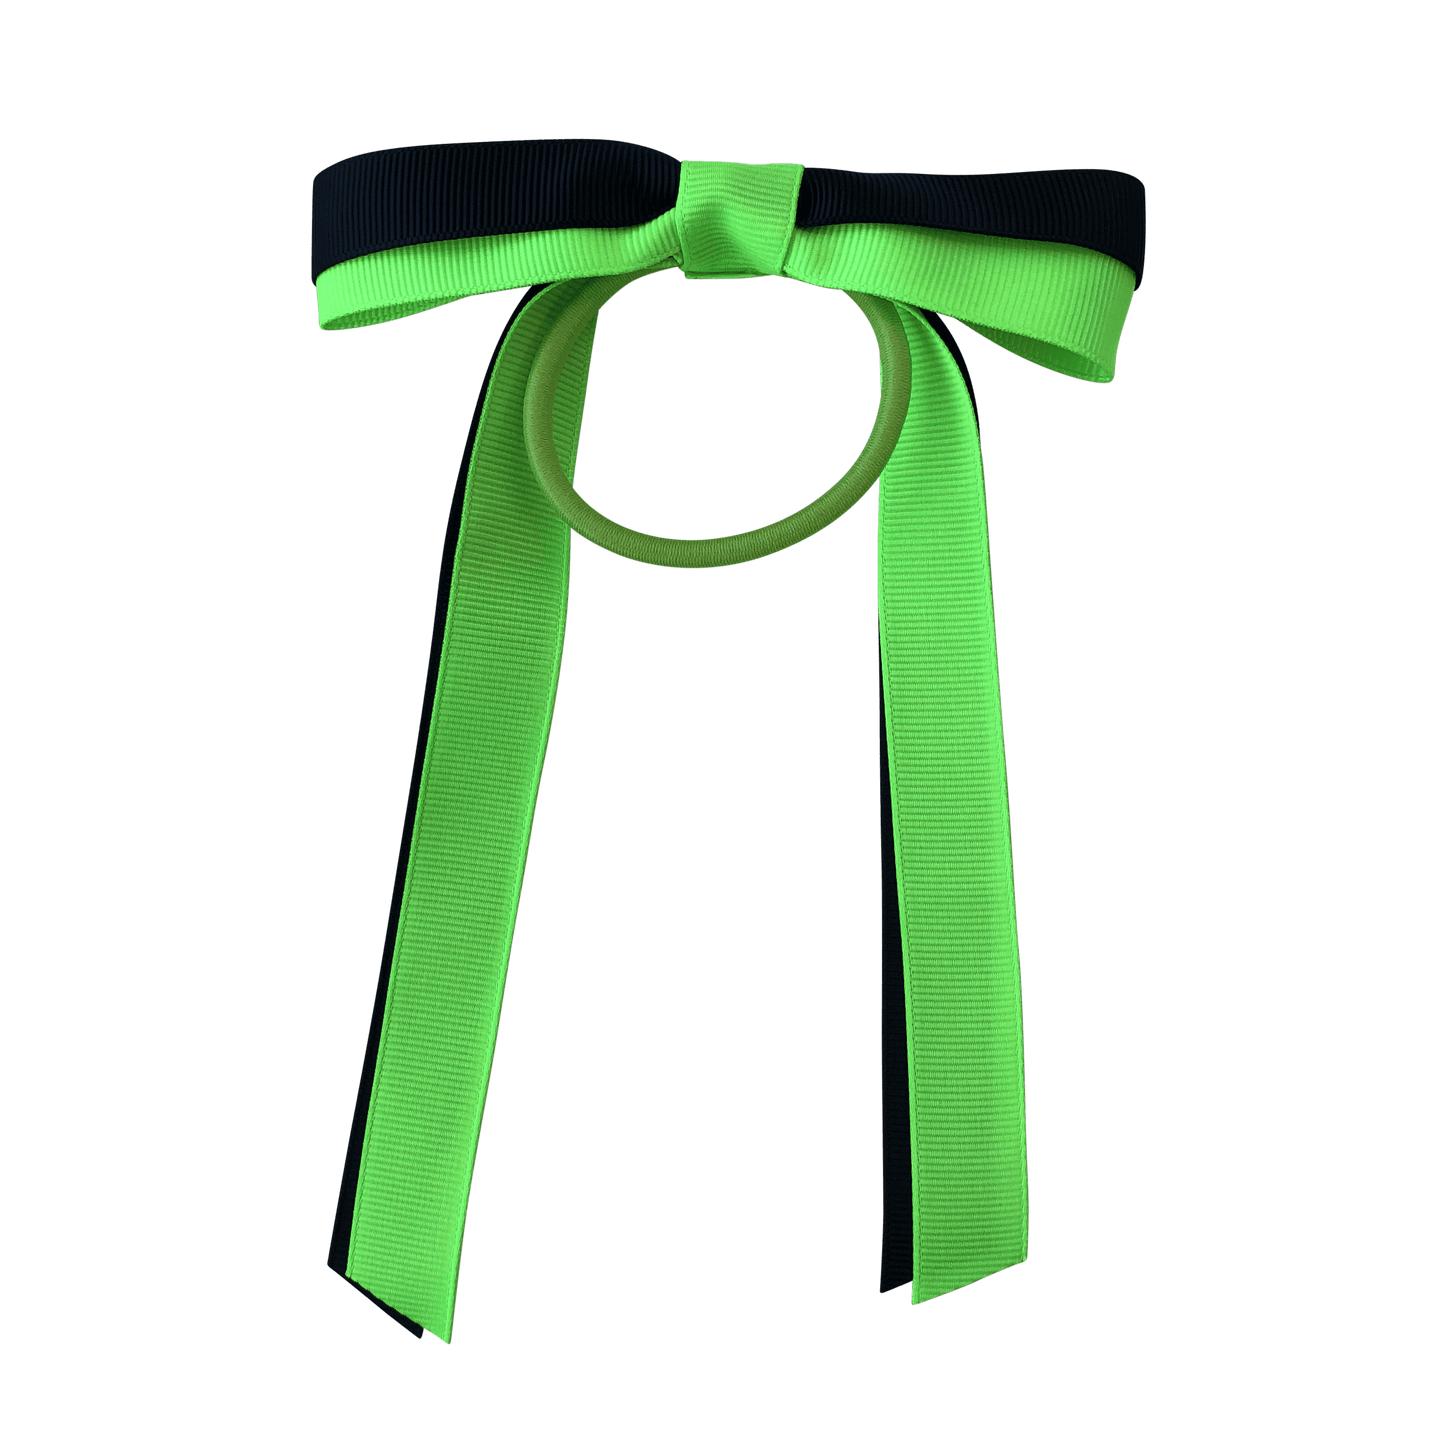 Fluoro Green & Black Hair Accessories - Assorted Hair Accessories - School Uniform Hair Accessories - Ponytails and Fairytales